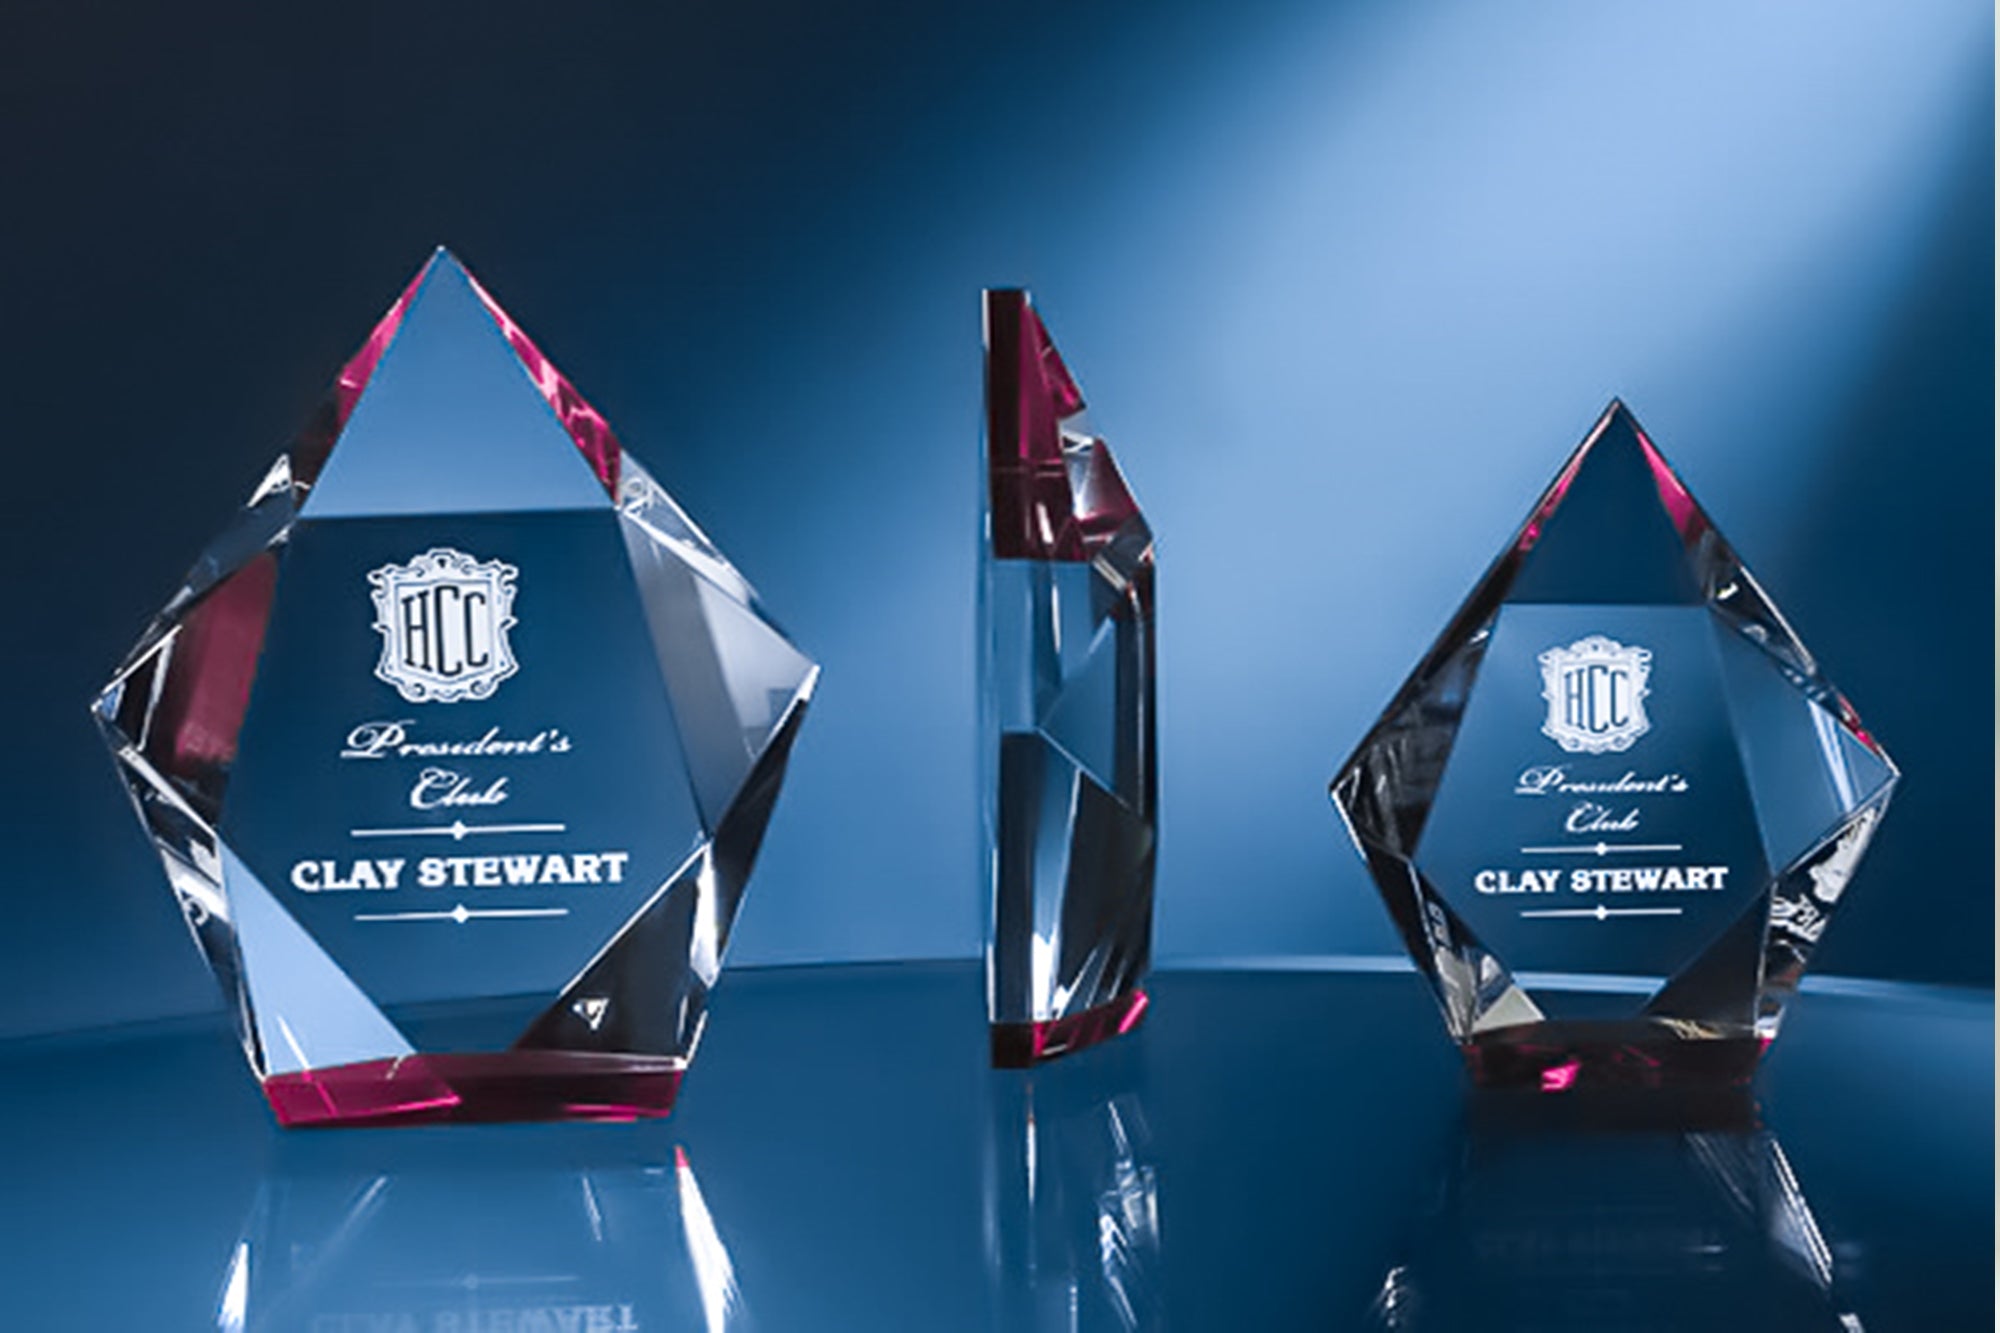 4 Considerations to Make for Your Engraved Awards